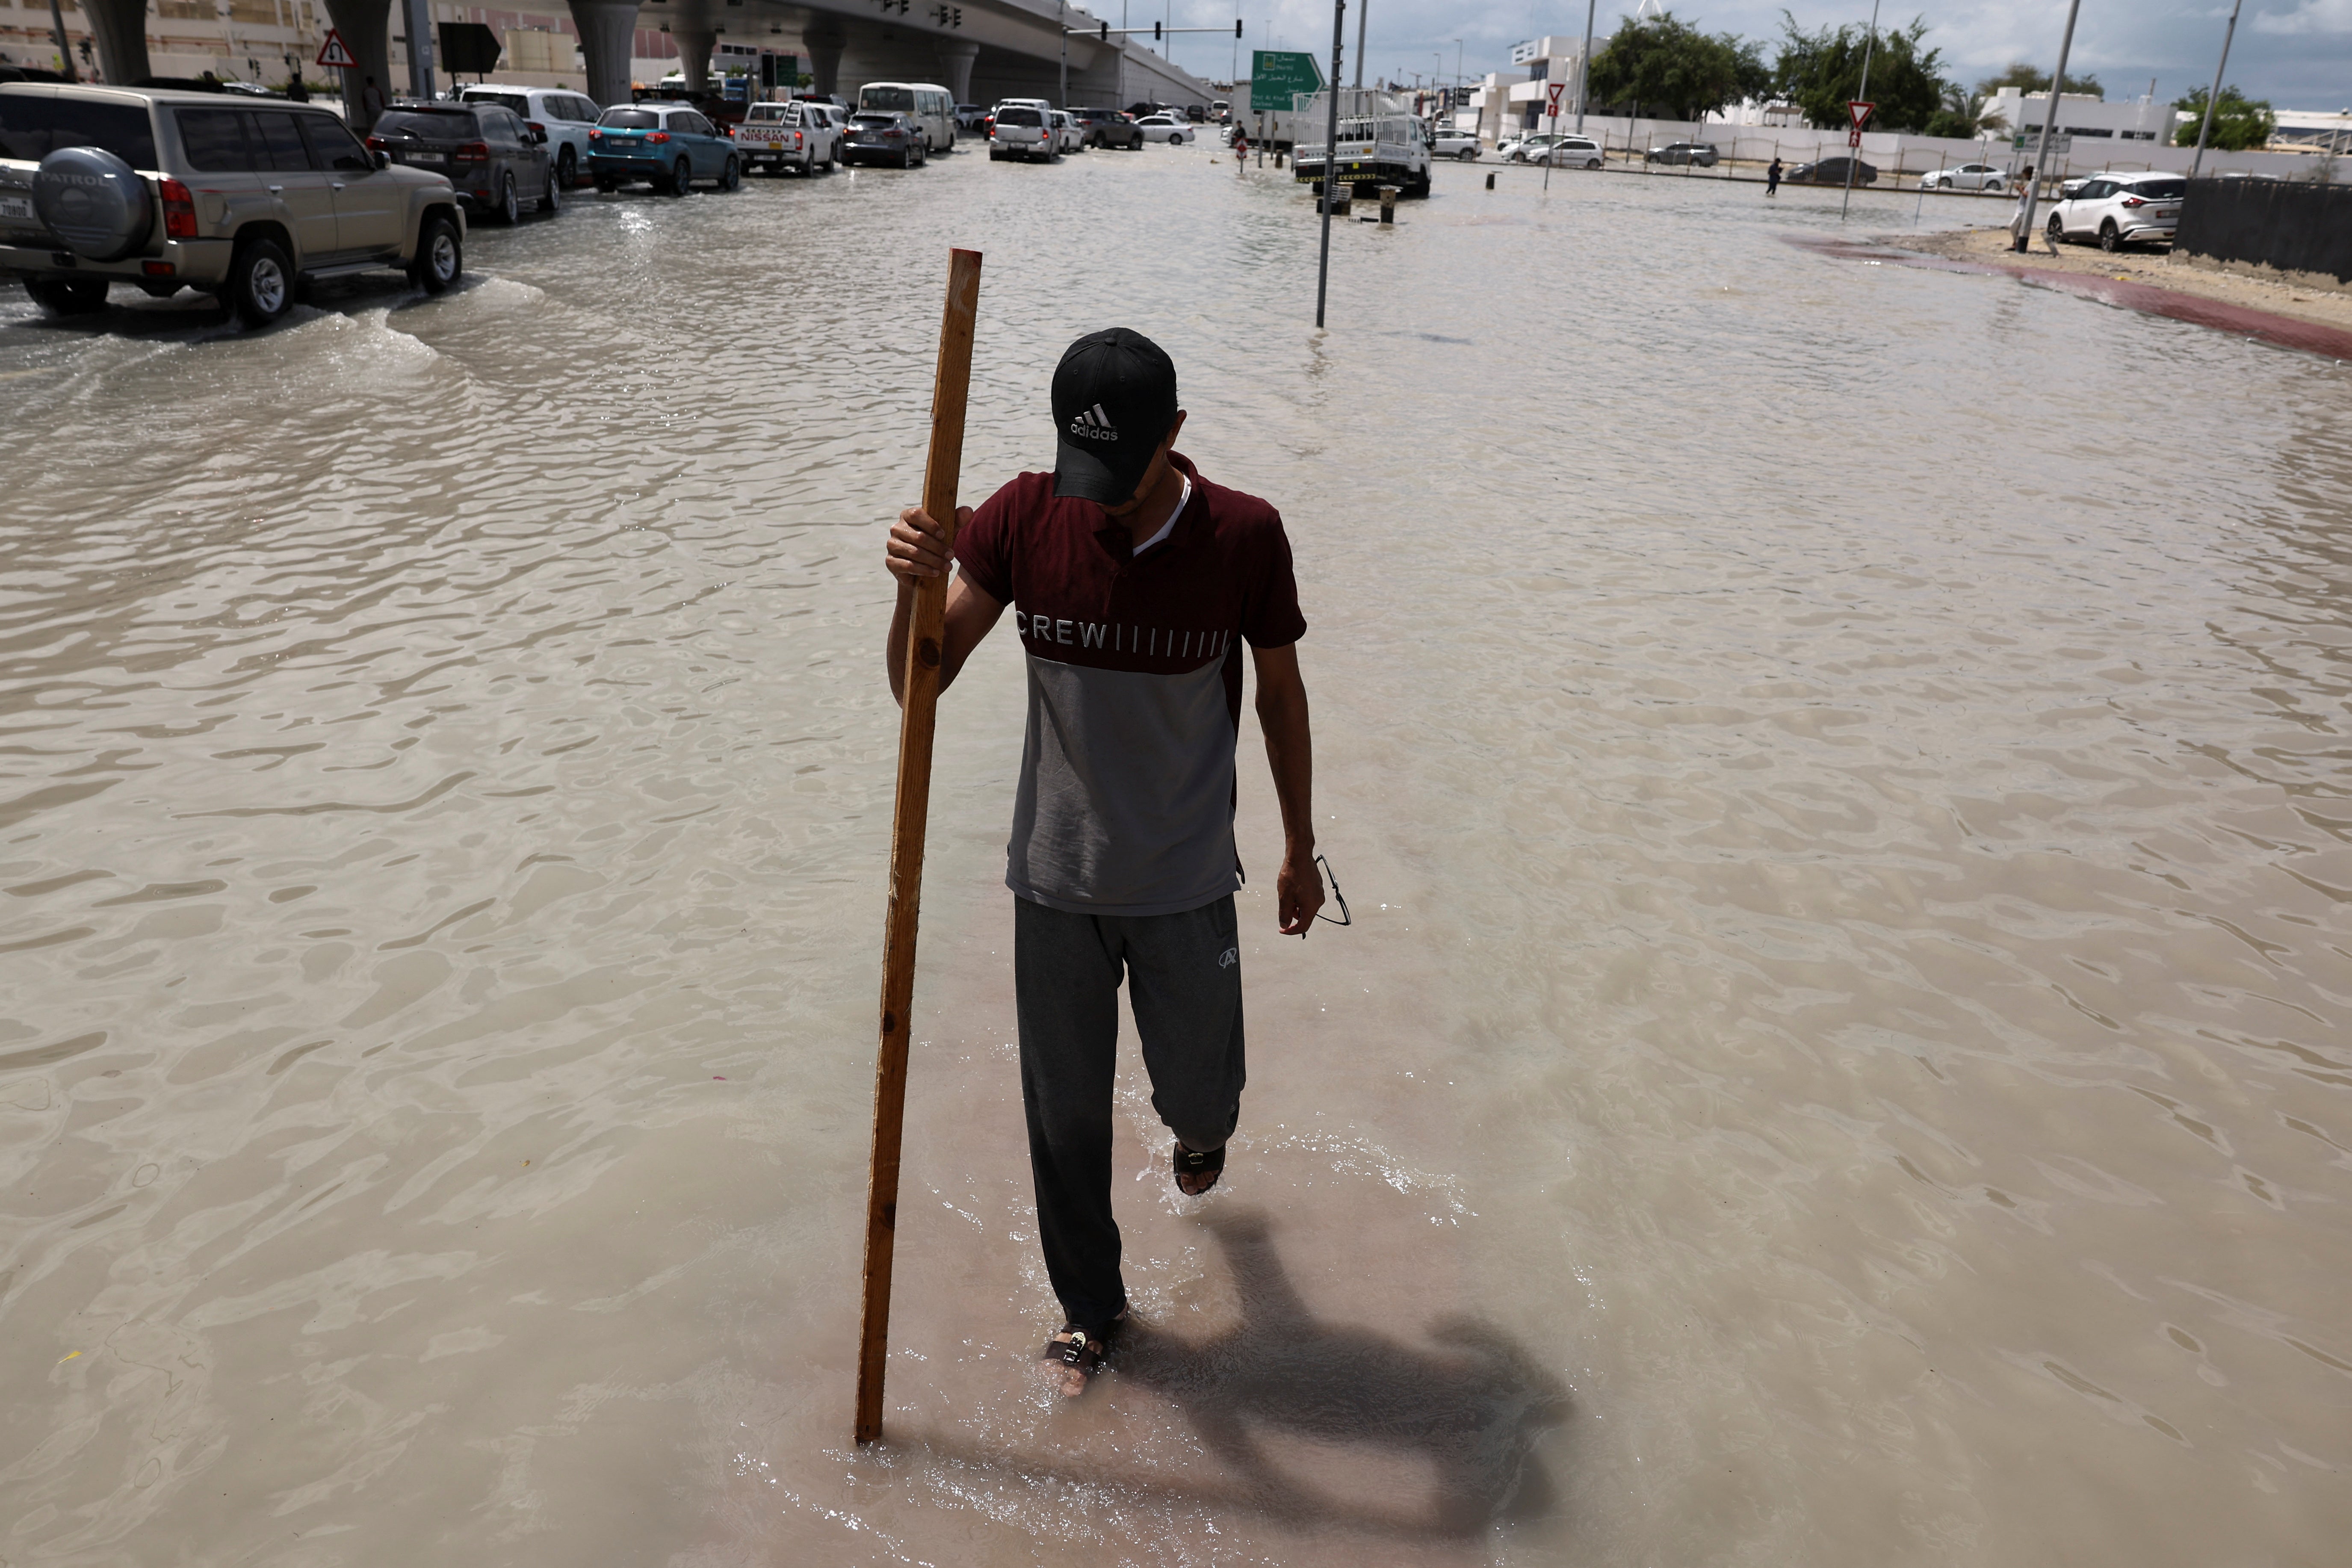 A person walks surrounded by flood water caused by heavy rains, in Dubai, United Arab Emirates